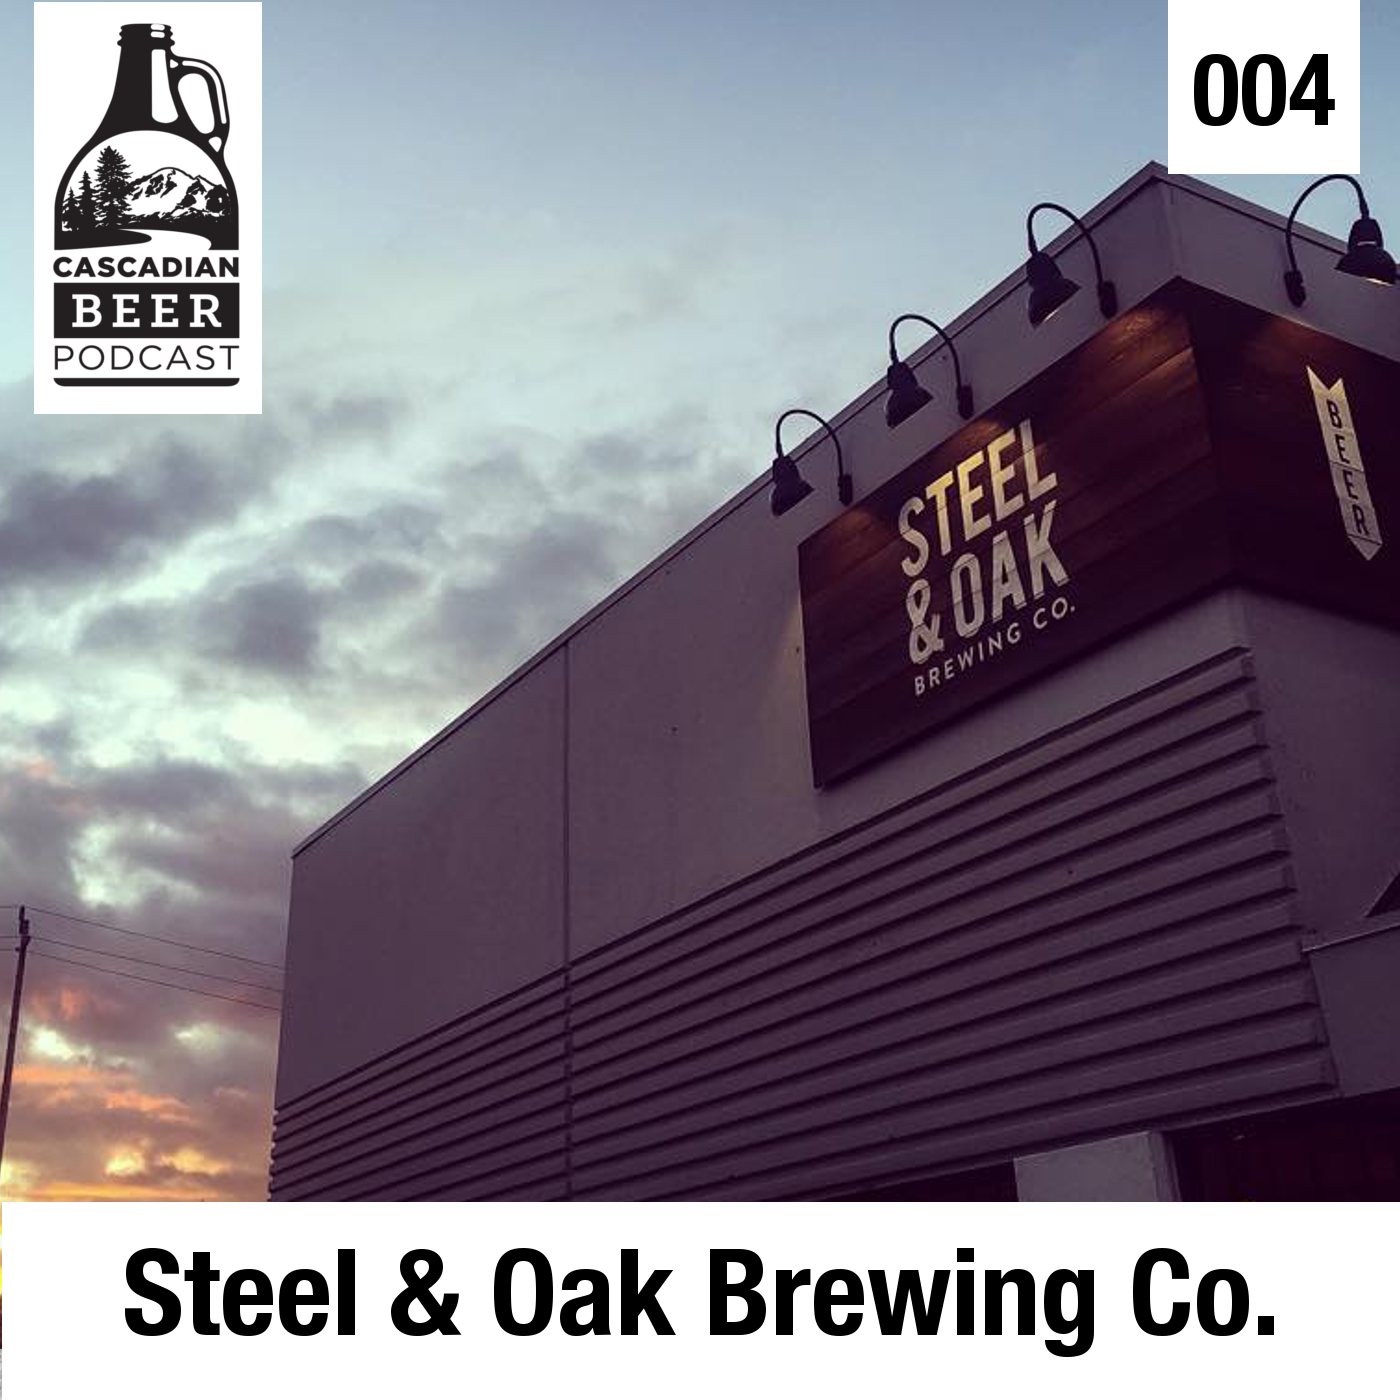 Steel & Oak Brewing Co. - New Westminster, BC